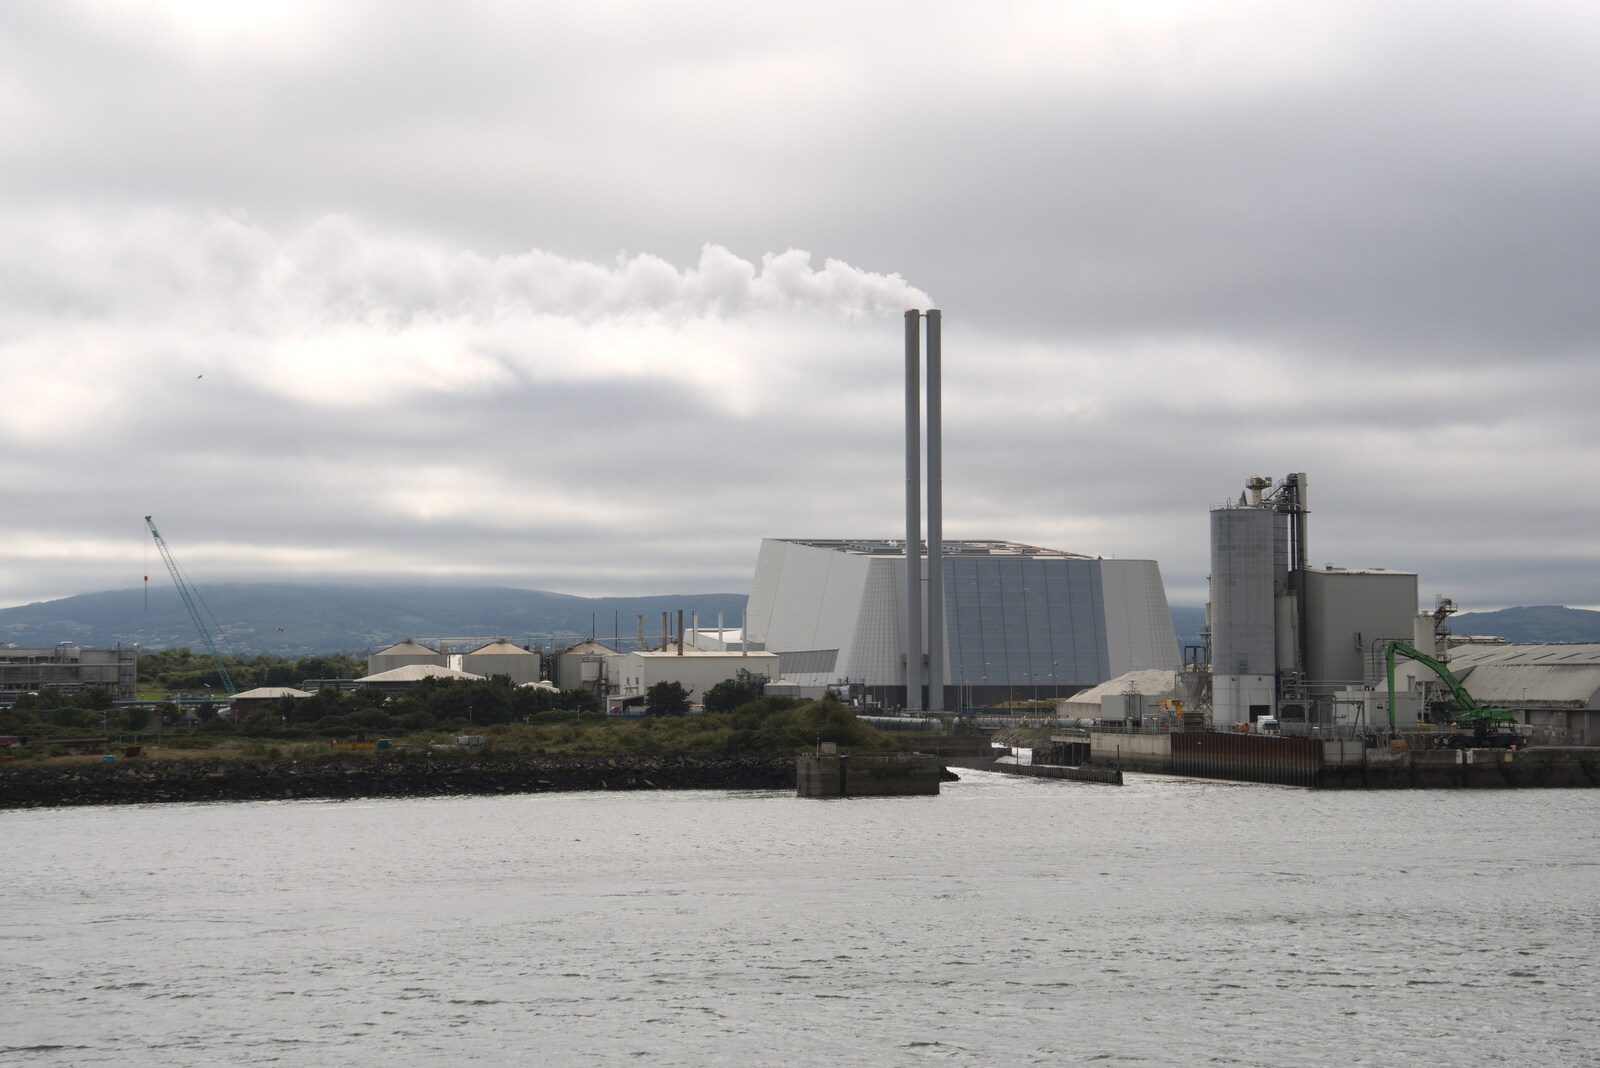 Poolbeg generating station from The Guinness Storehouse Tour, St. James's Gate, Dublin, Ireland - 17th August 2021